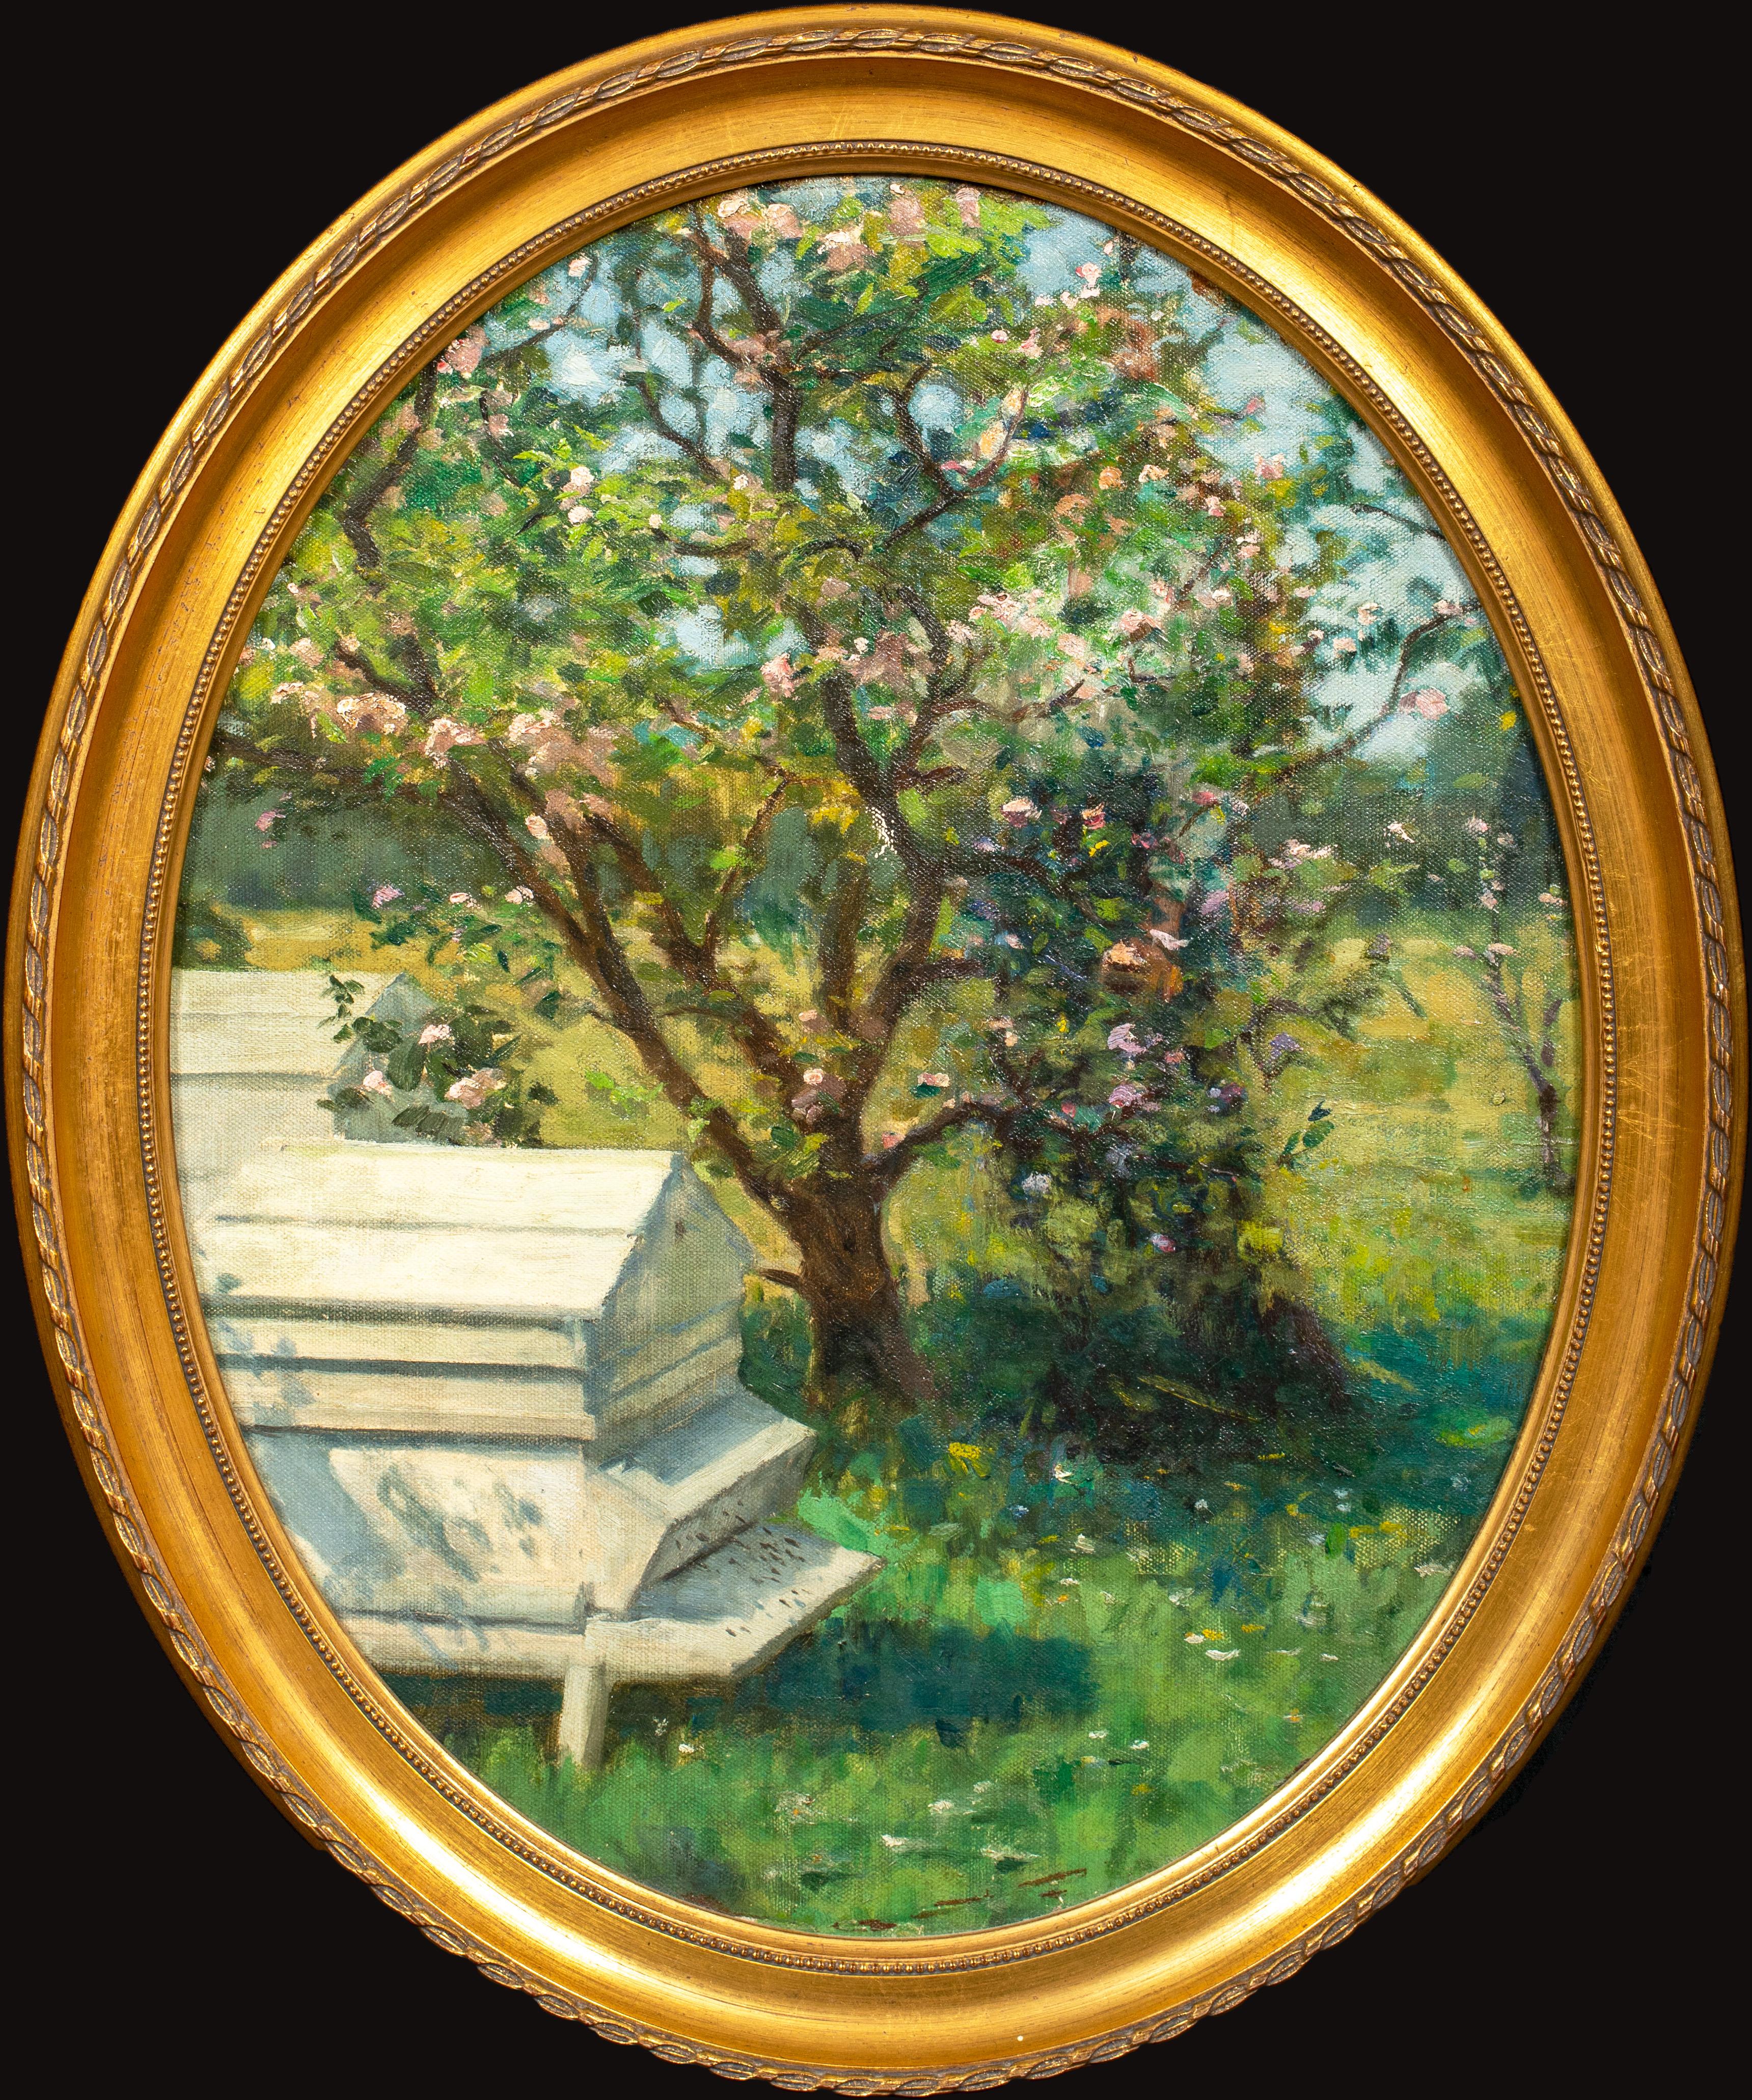 William Banks FORTESCUE Landscape Painting - The Bee Hive In Spring, 19th Century